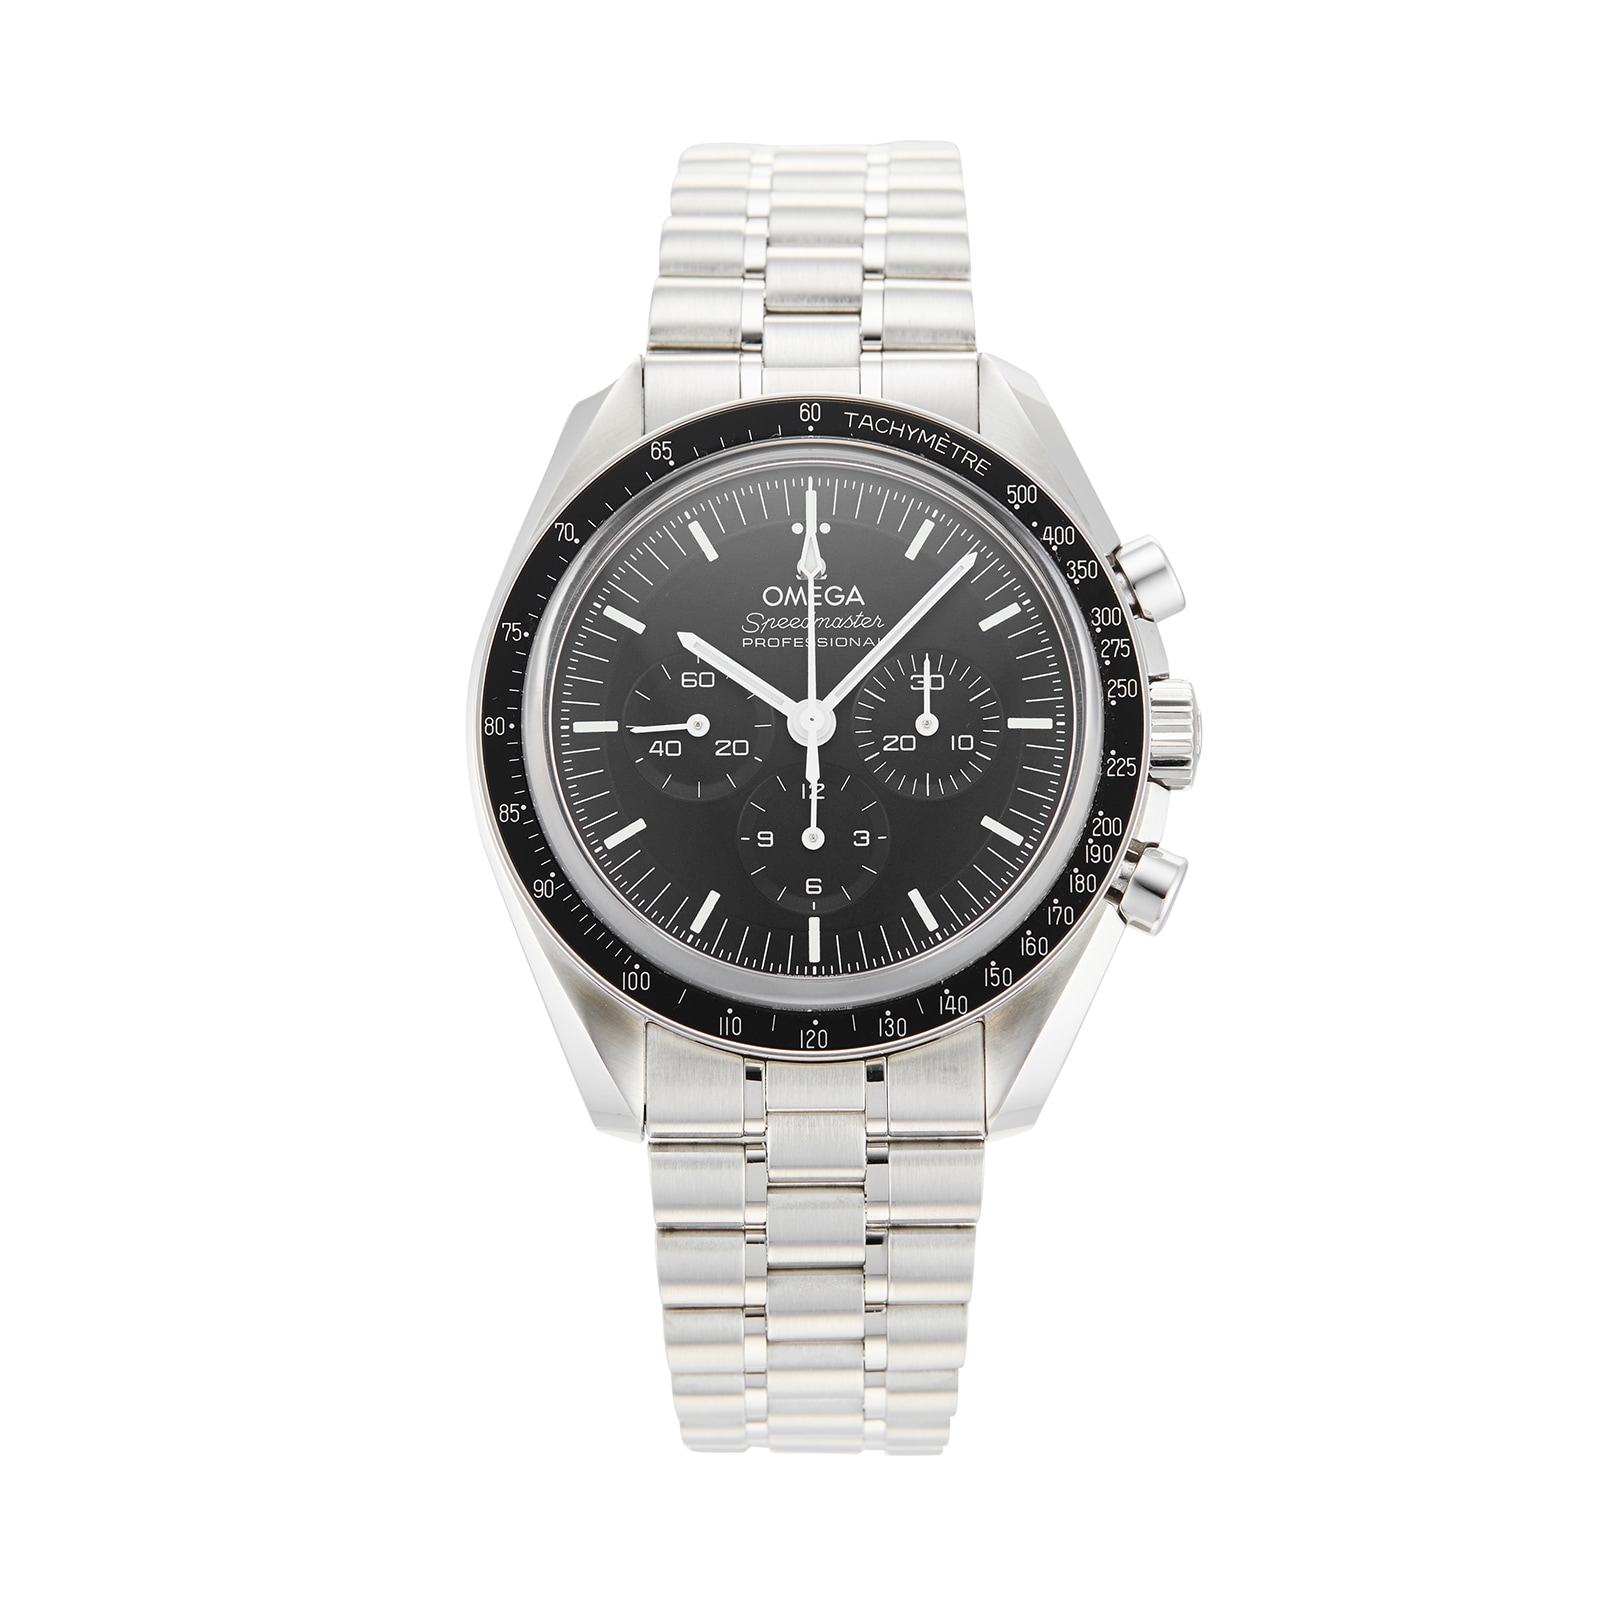 Pre-Owned OMEGA Speedmaster Moonwatch Professional Mens Watch 310.30.42.50.01.002